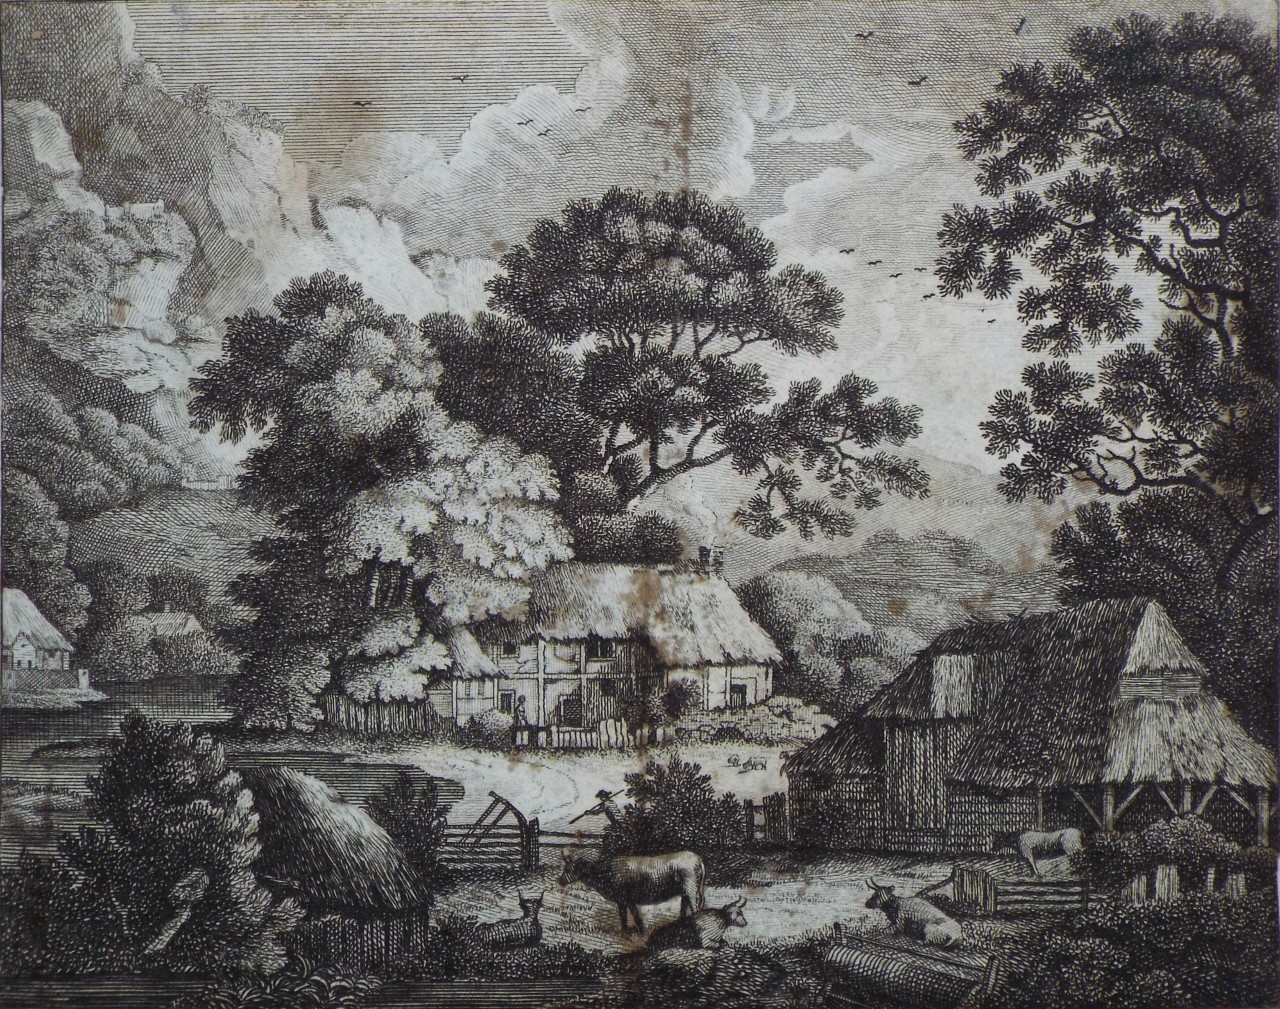 Etching - (Landscape with cattle and thatched cottages) - 